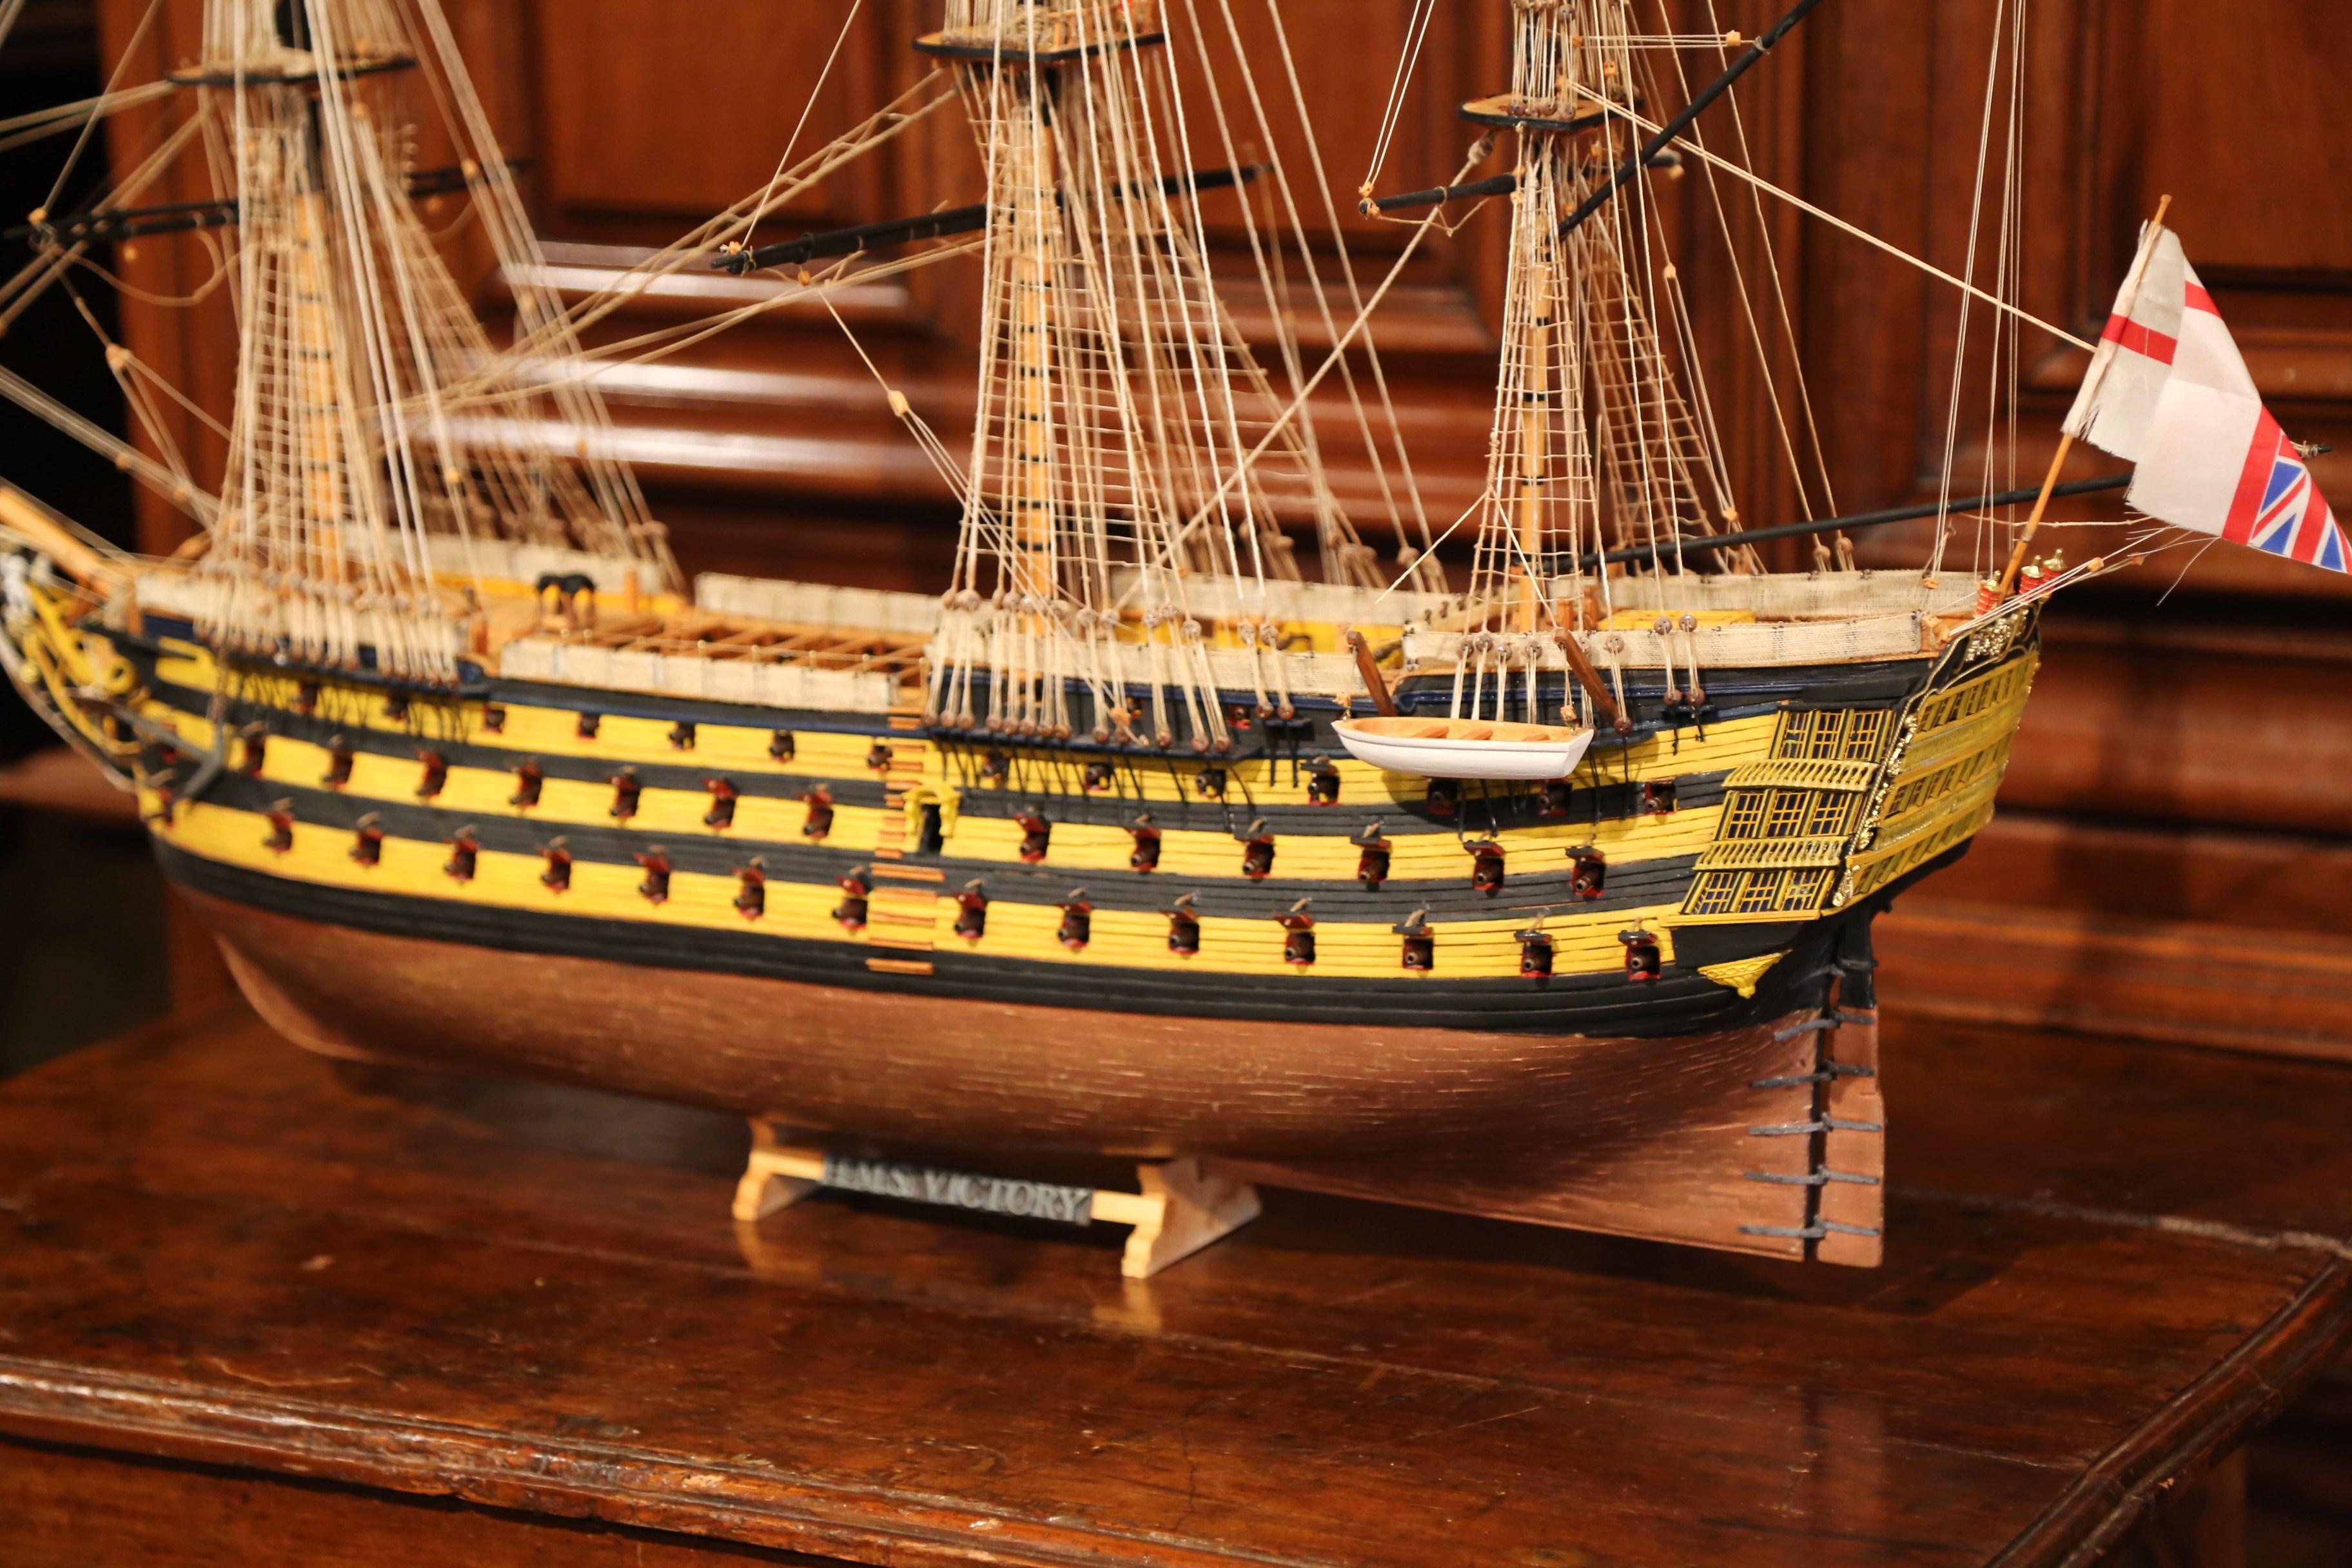 This elegant and majestic ship model was crafted in England, circa 1950. Named H.S.M. Victory, the large naval sailboat sits on a separate wooden base and features authentic and unique details including hundreds of string rigging, spare boats, flags